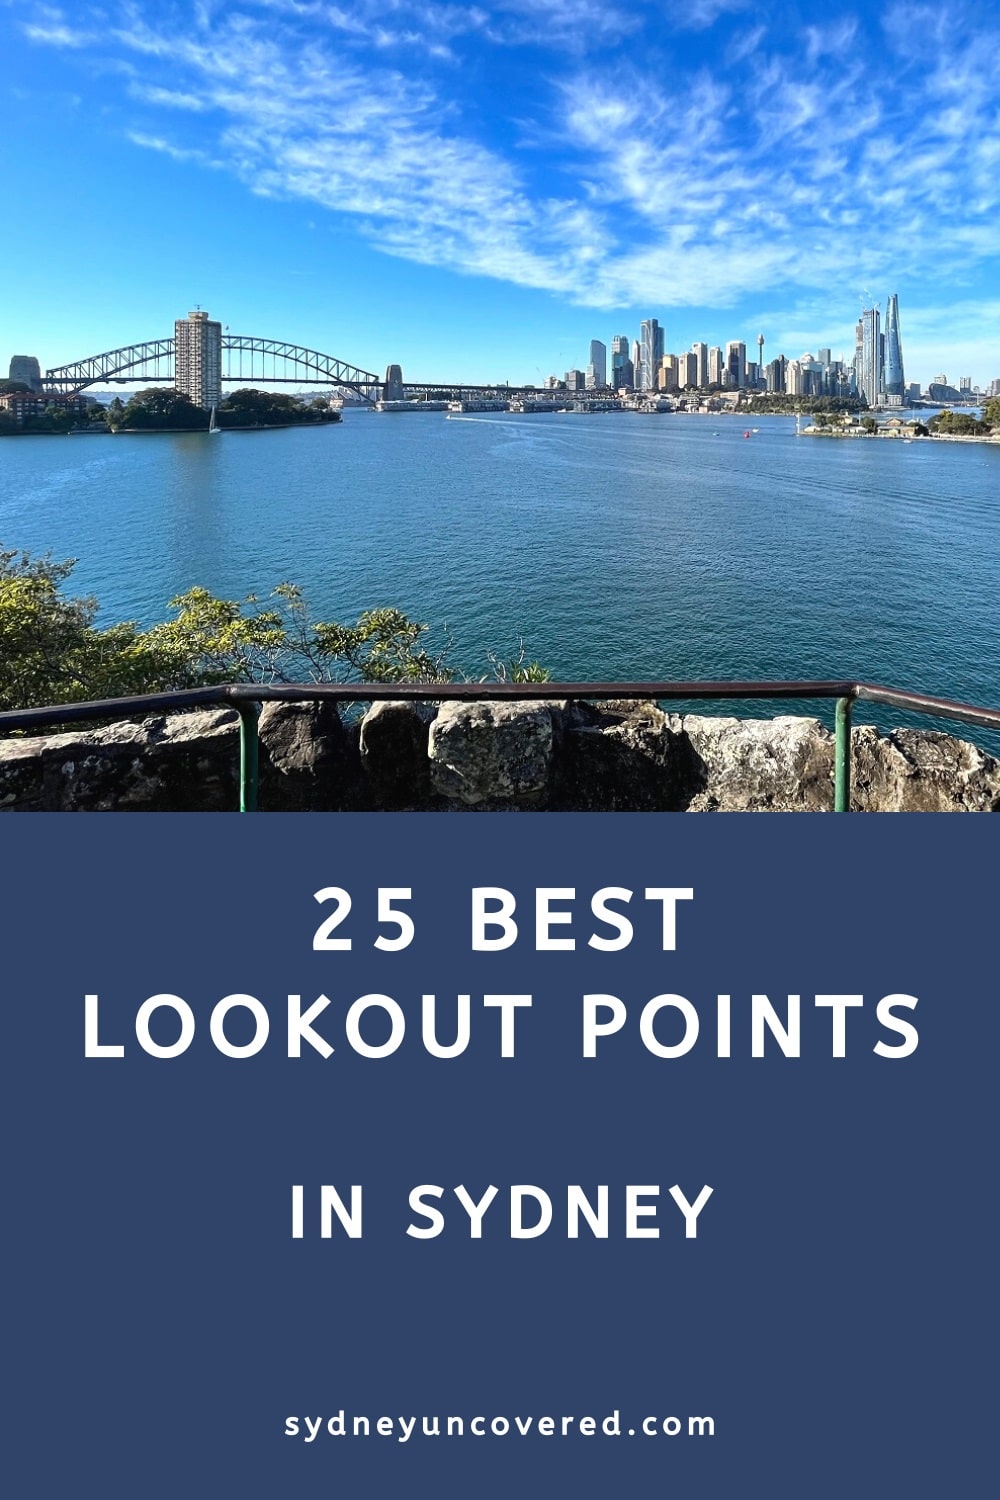 Best lookout points in Sydney with scenic views